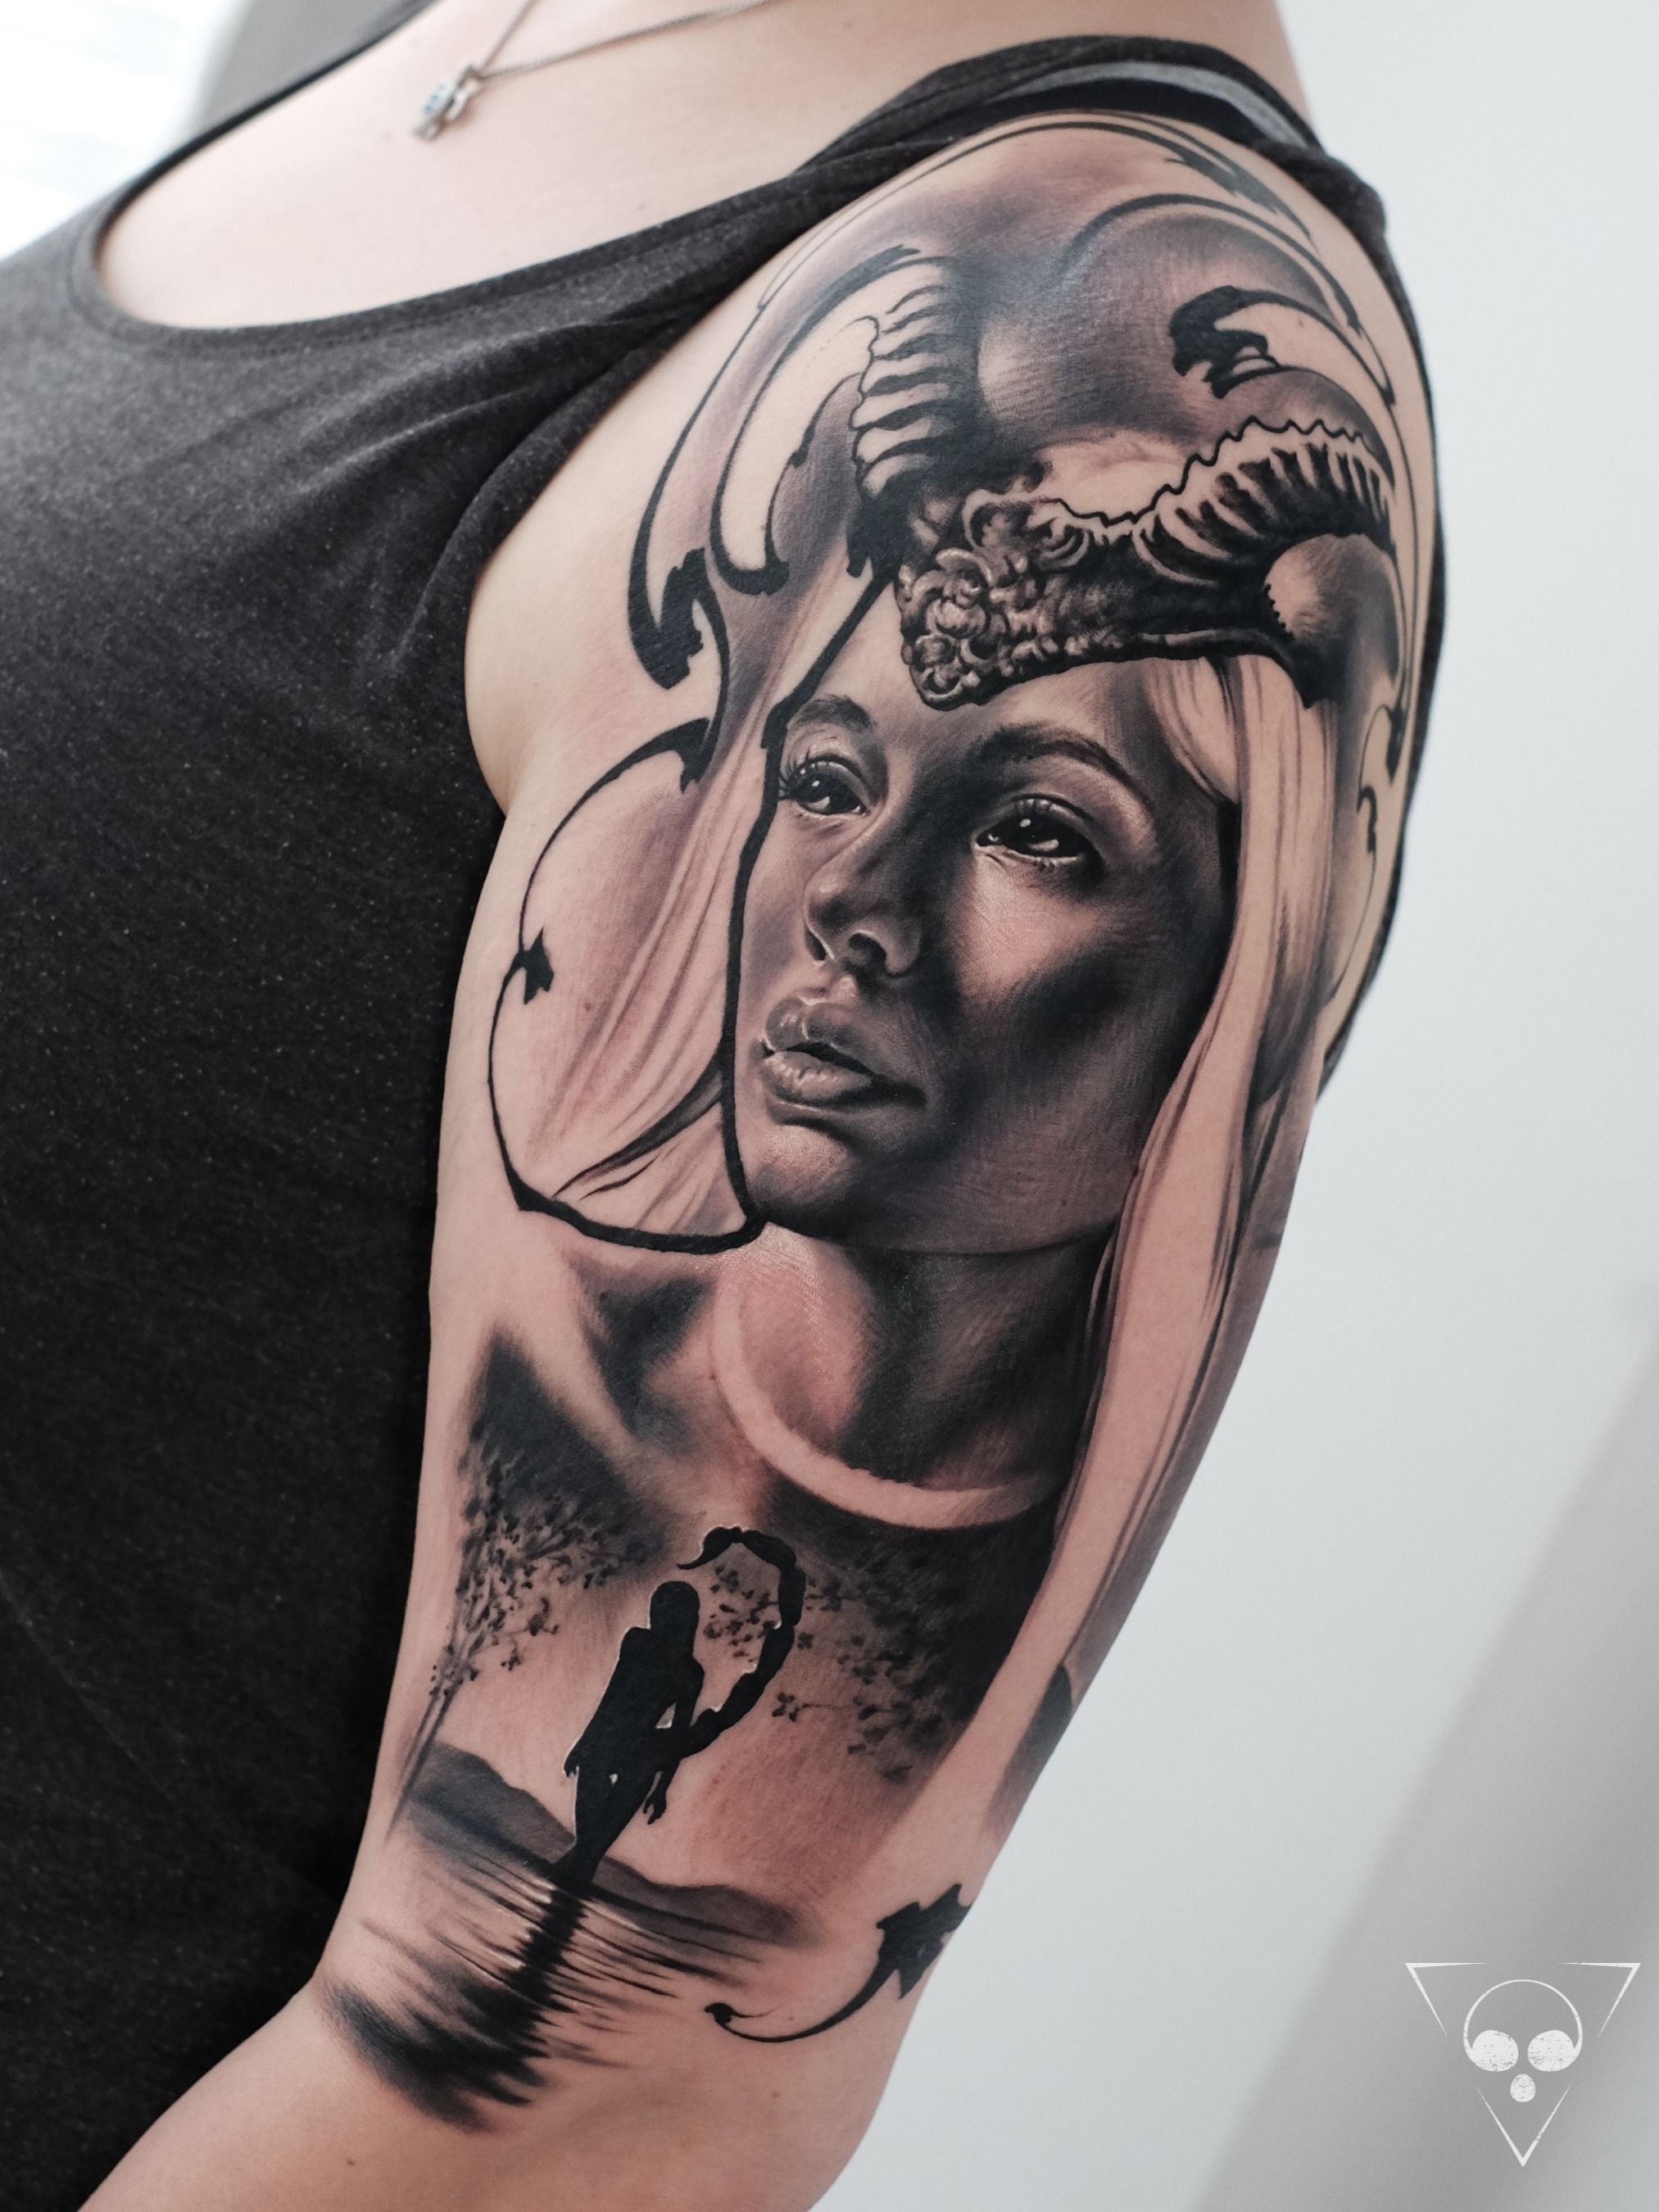 Moon goddess cover up tattoo by... - Death or Glory Tattoo | Facebook